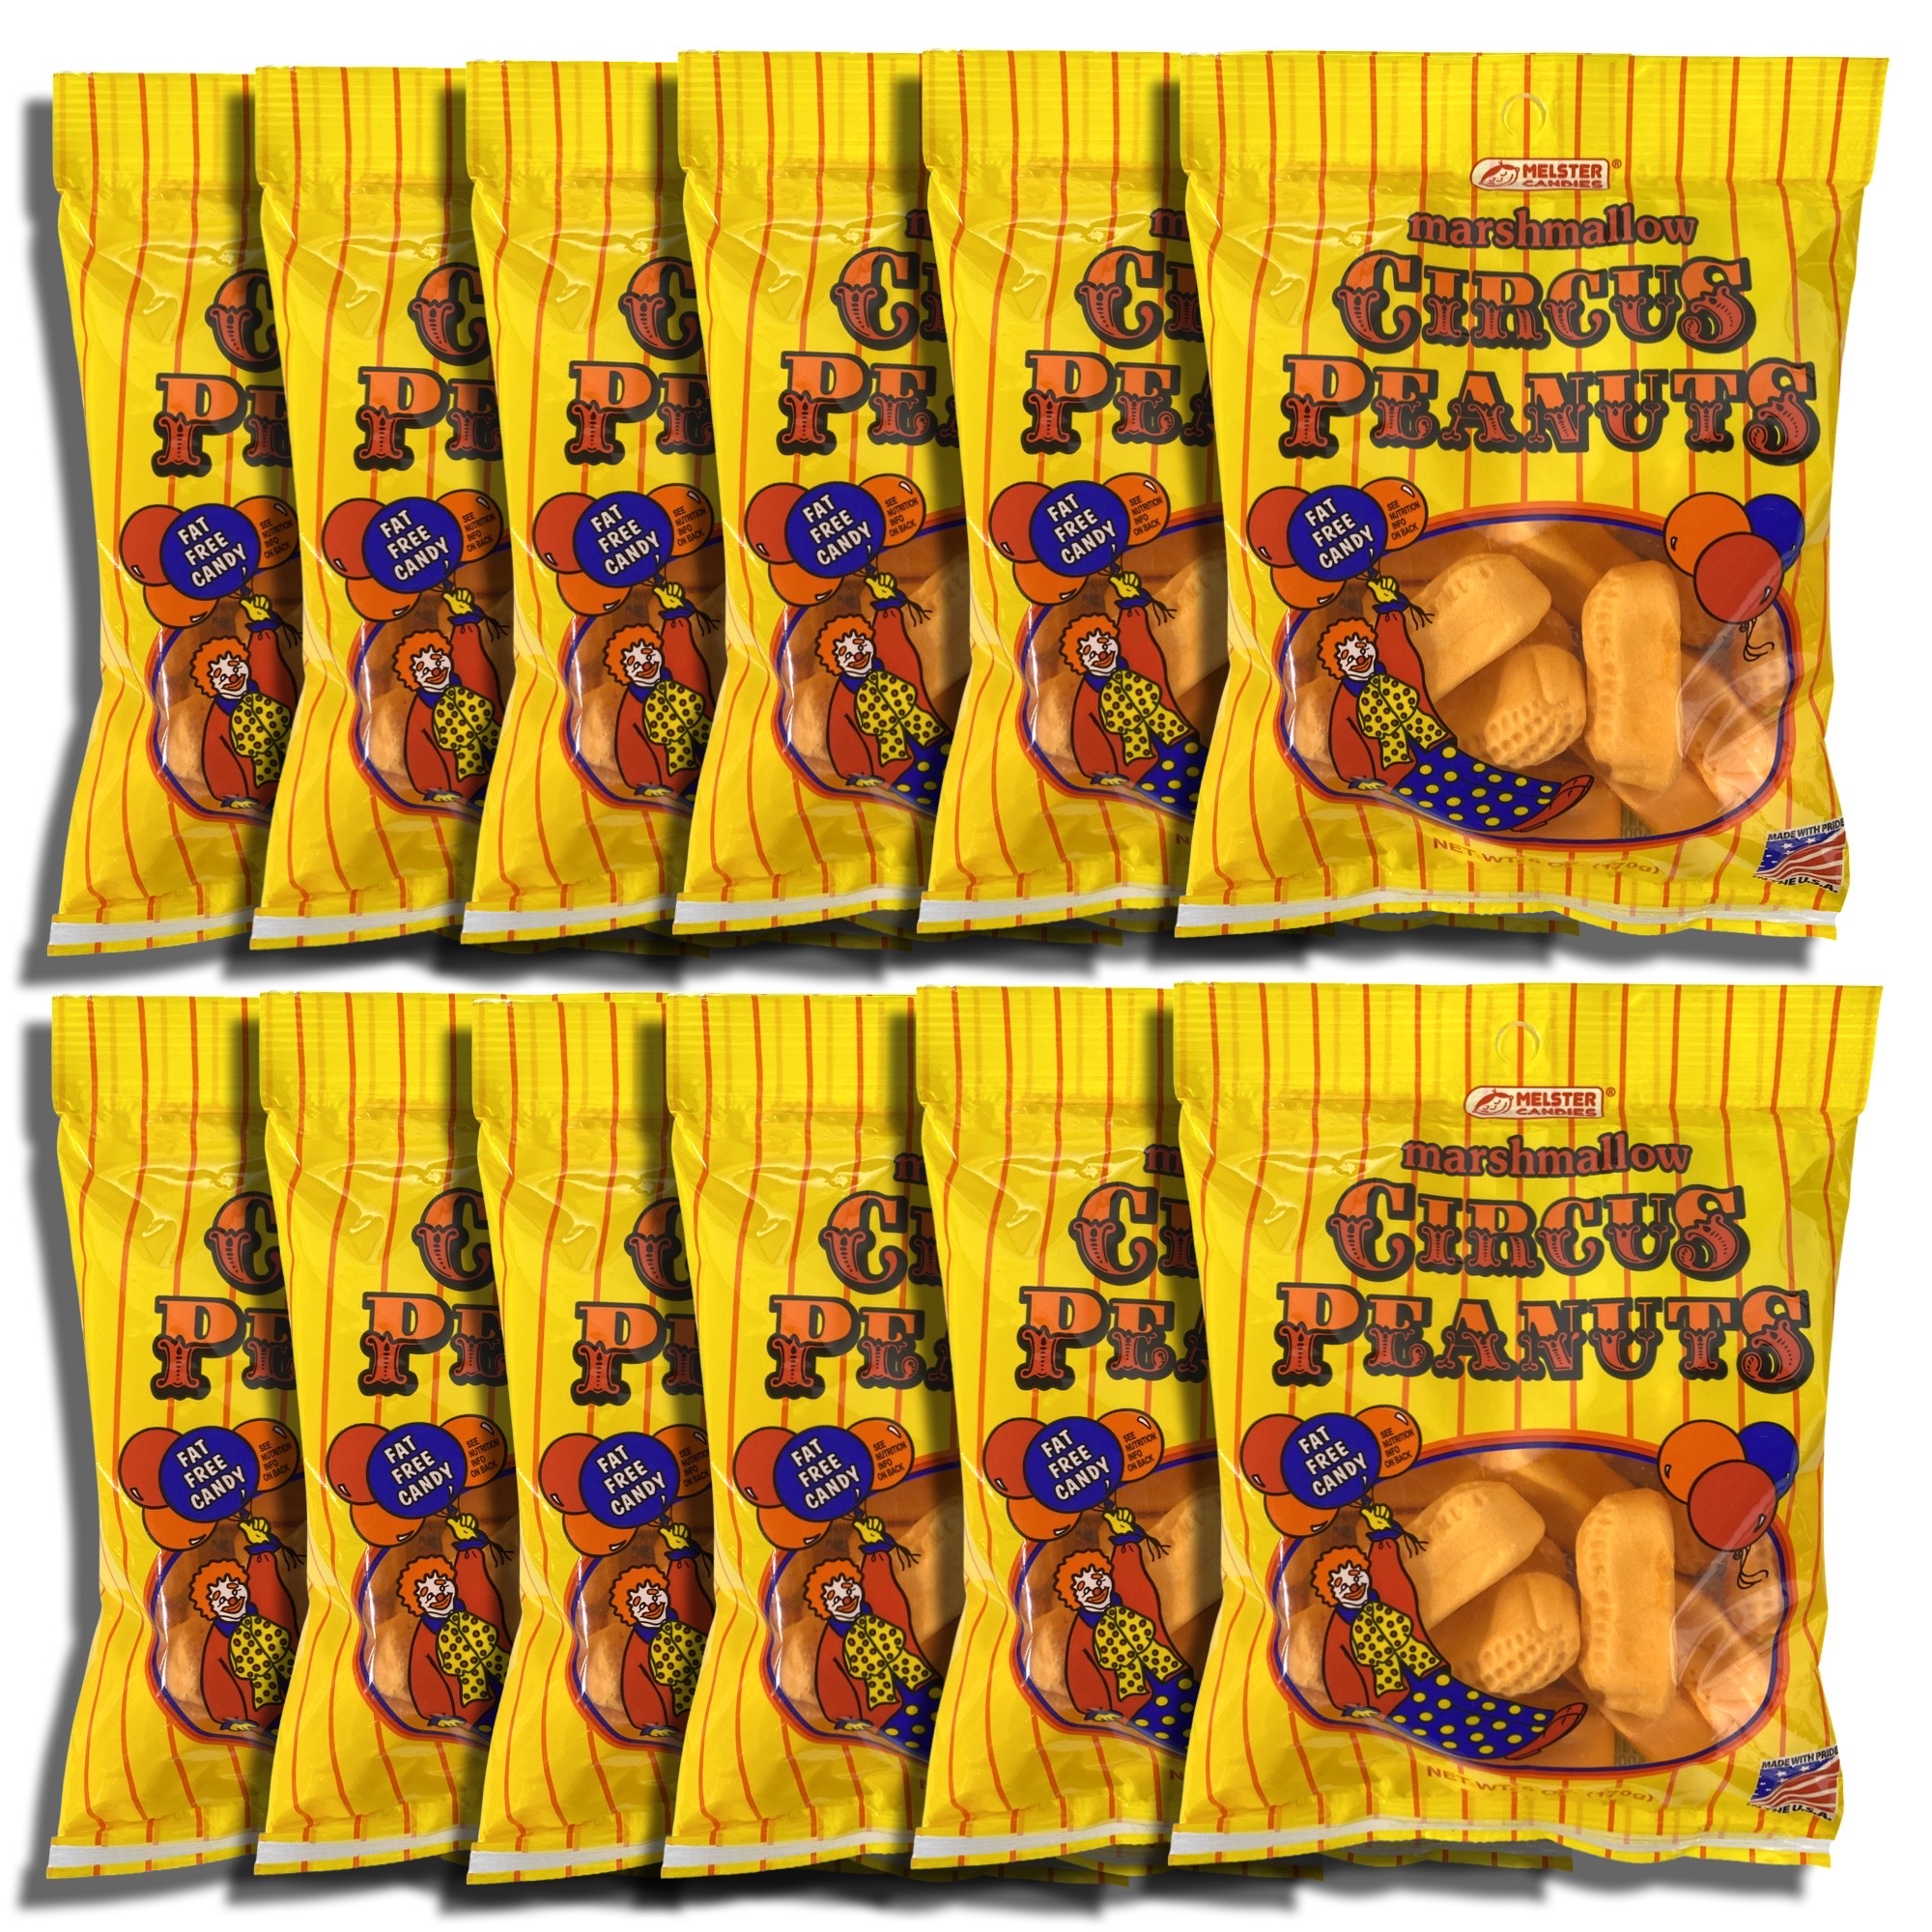 Marshmallow Circus Peanuts by Melster Bundled by Tribeca Curations | 6 Oz | Value Case Pack of 12 bags - image 1 of 5